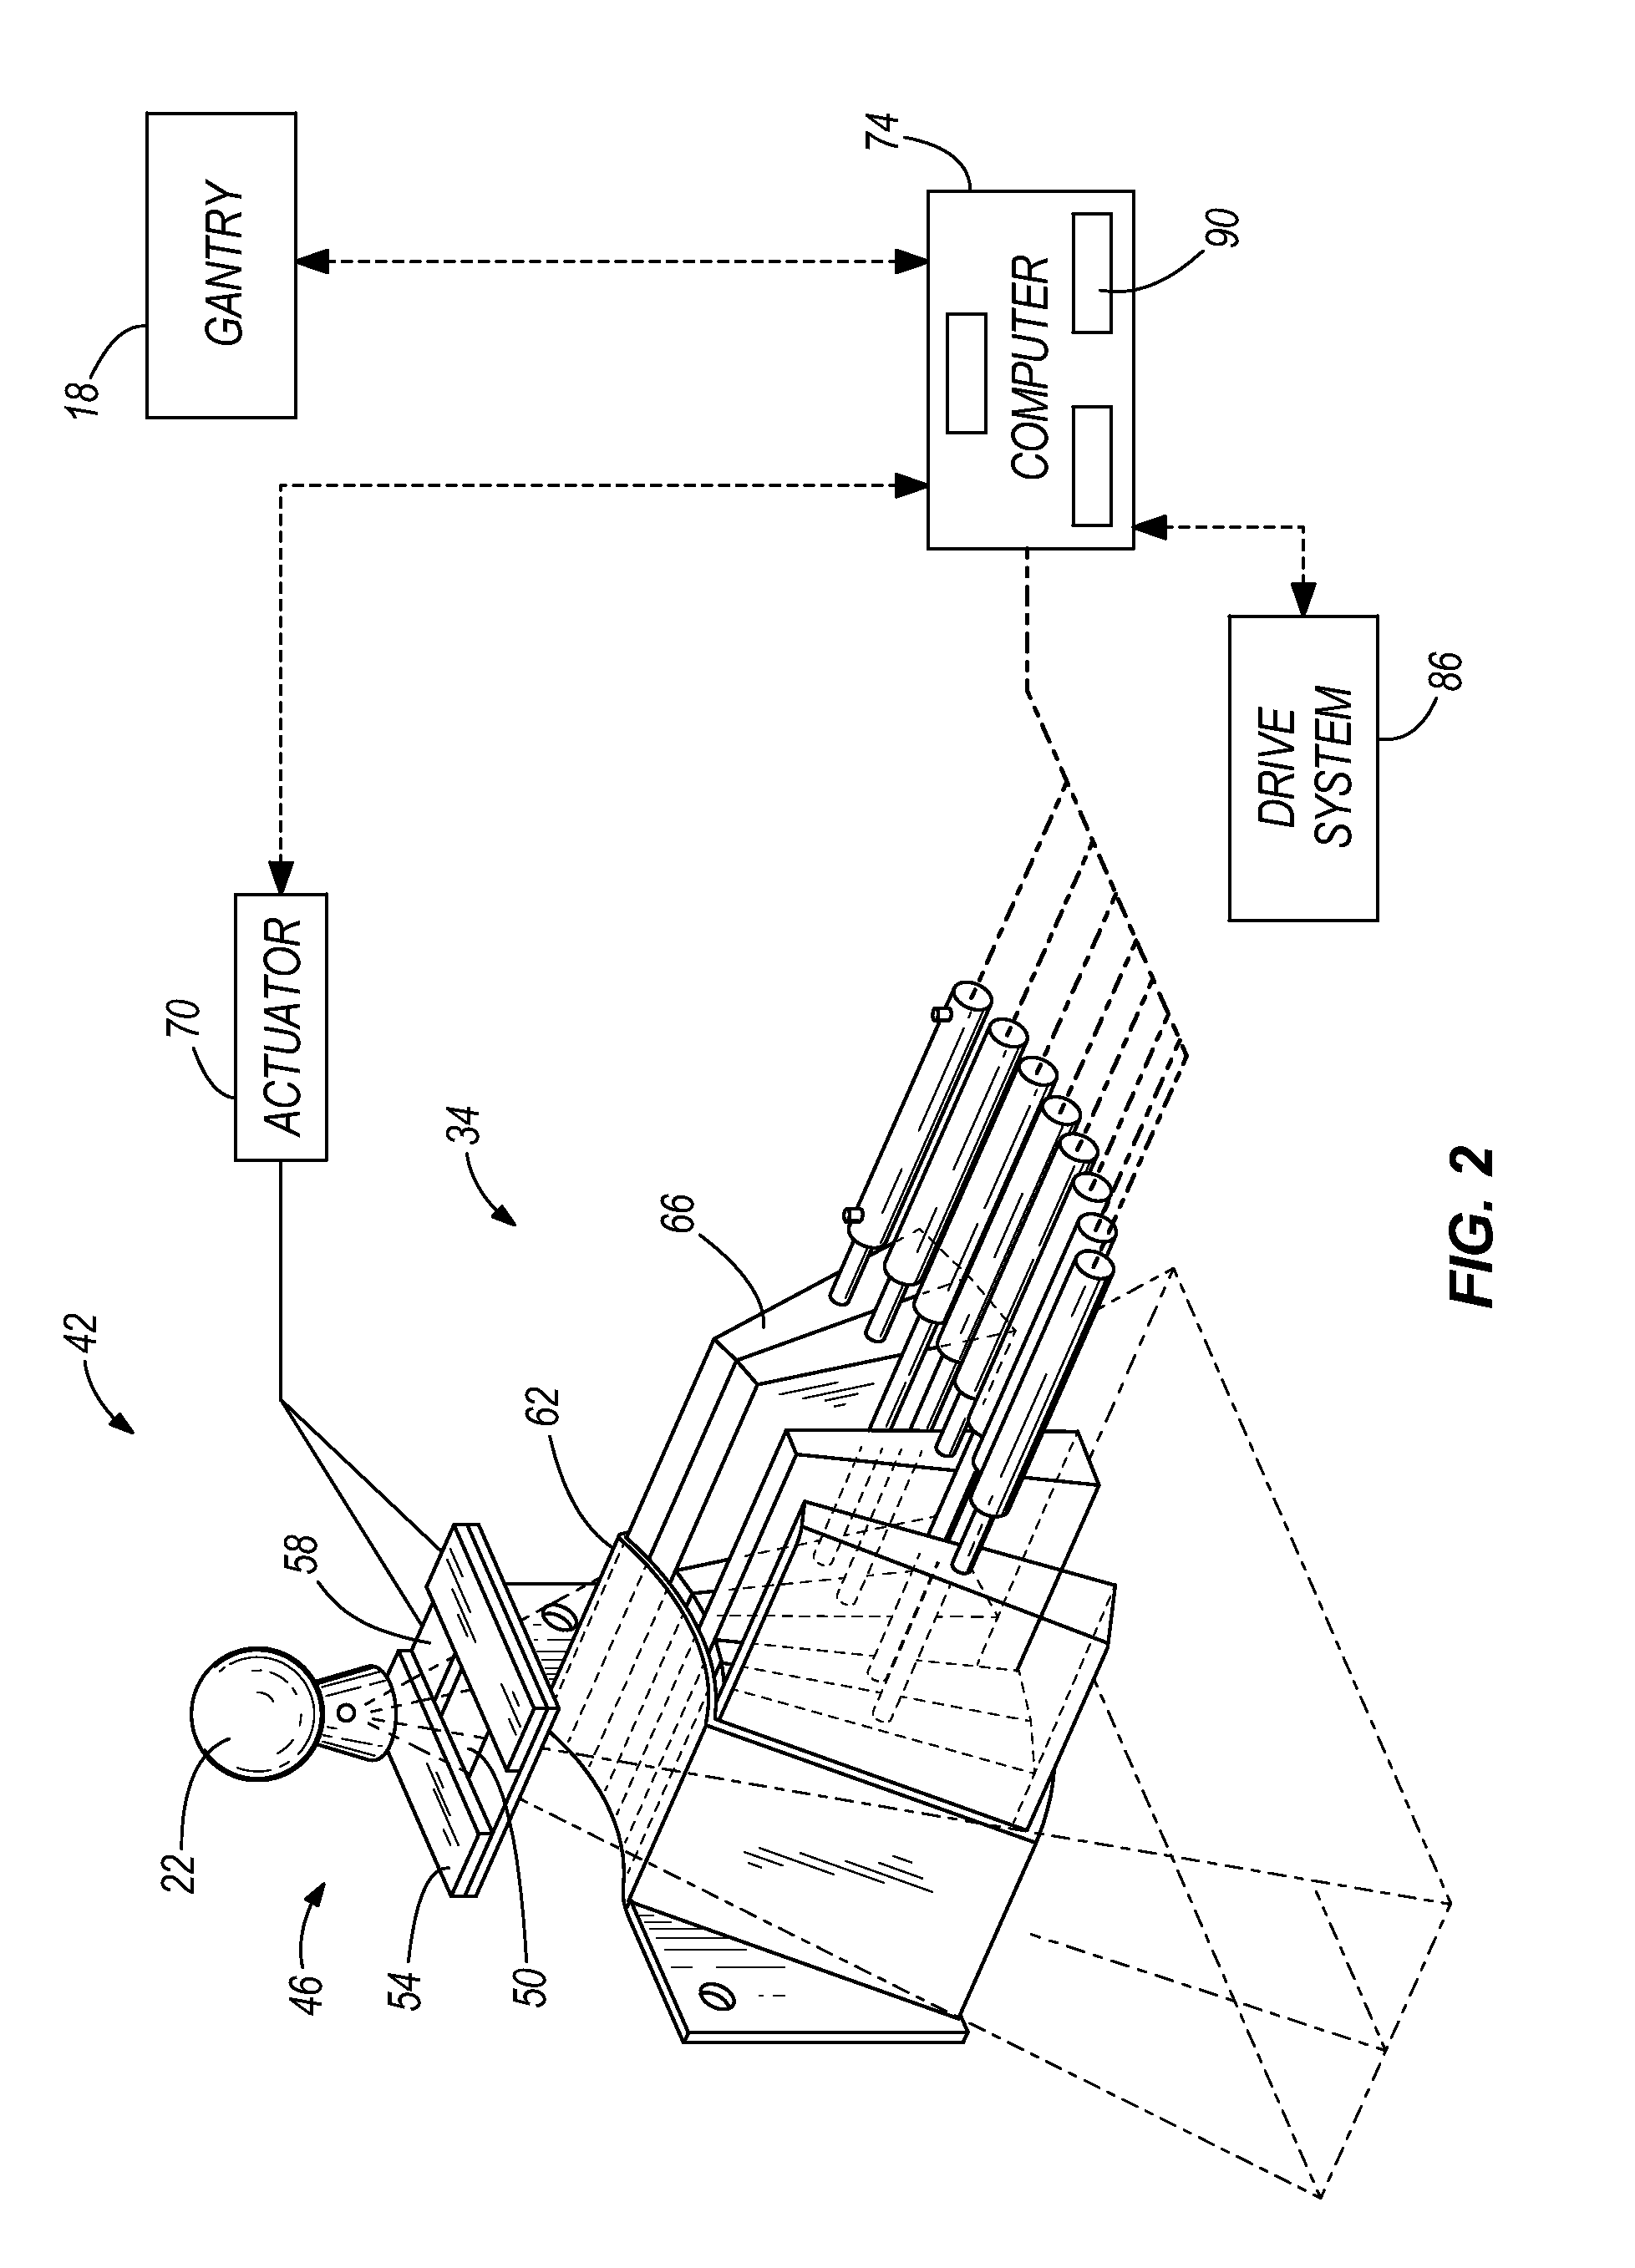 System and method of contouring a target area